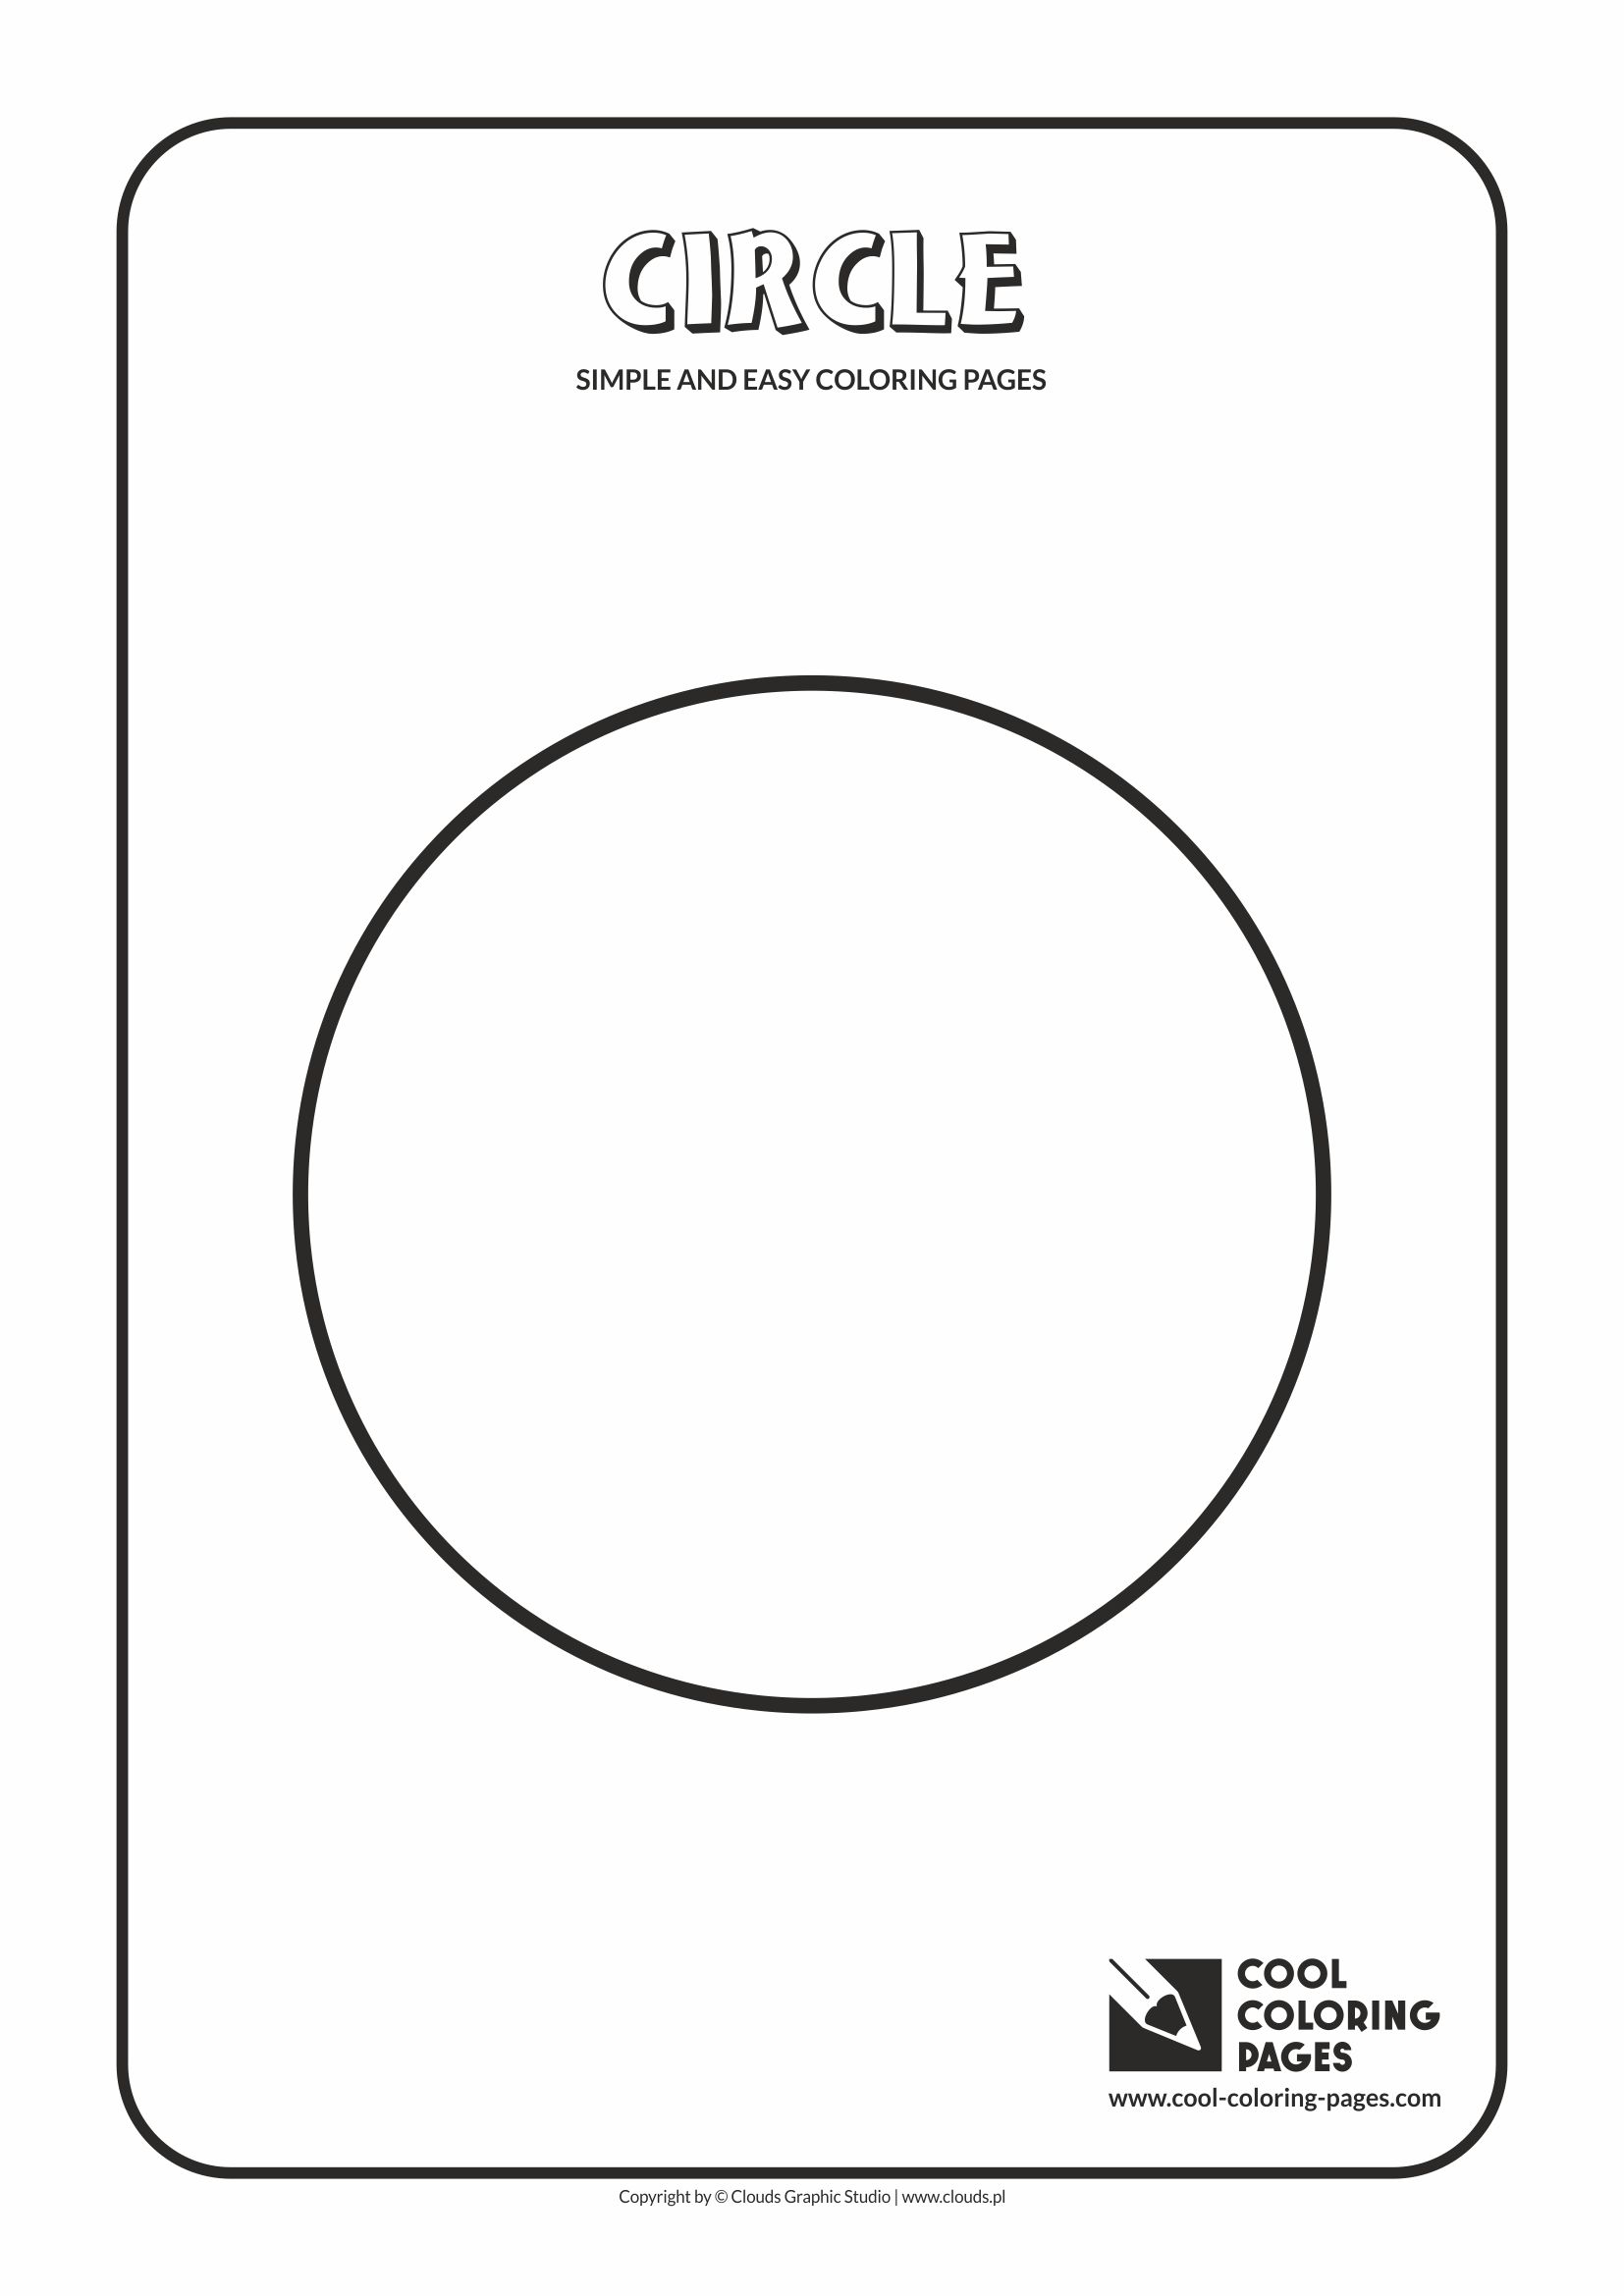 Simple and easy coloring pages for toddlers - Circle